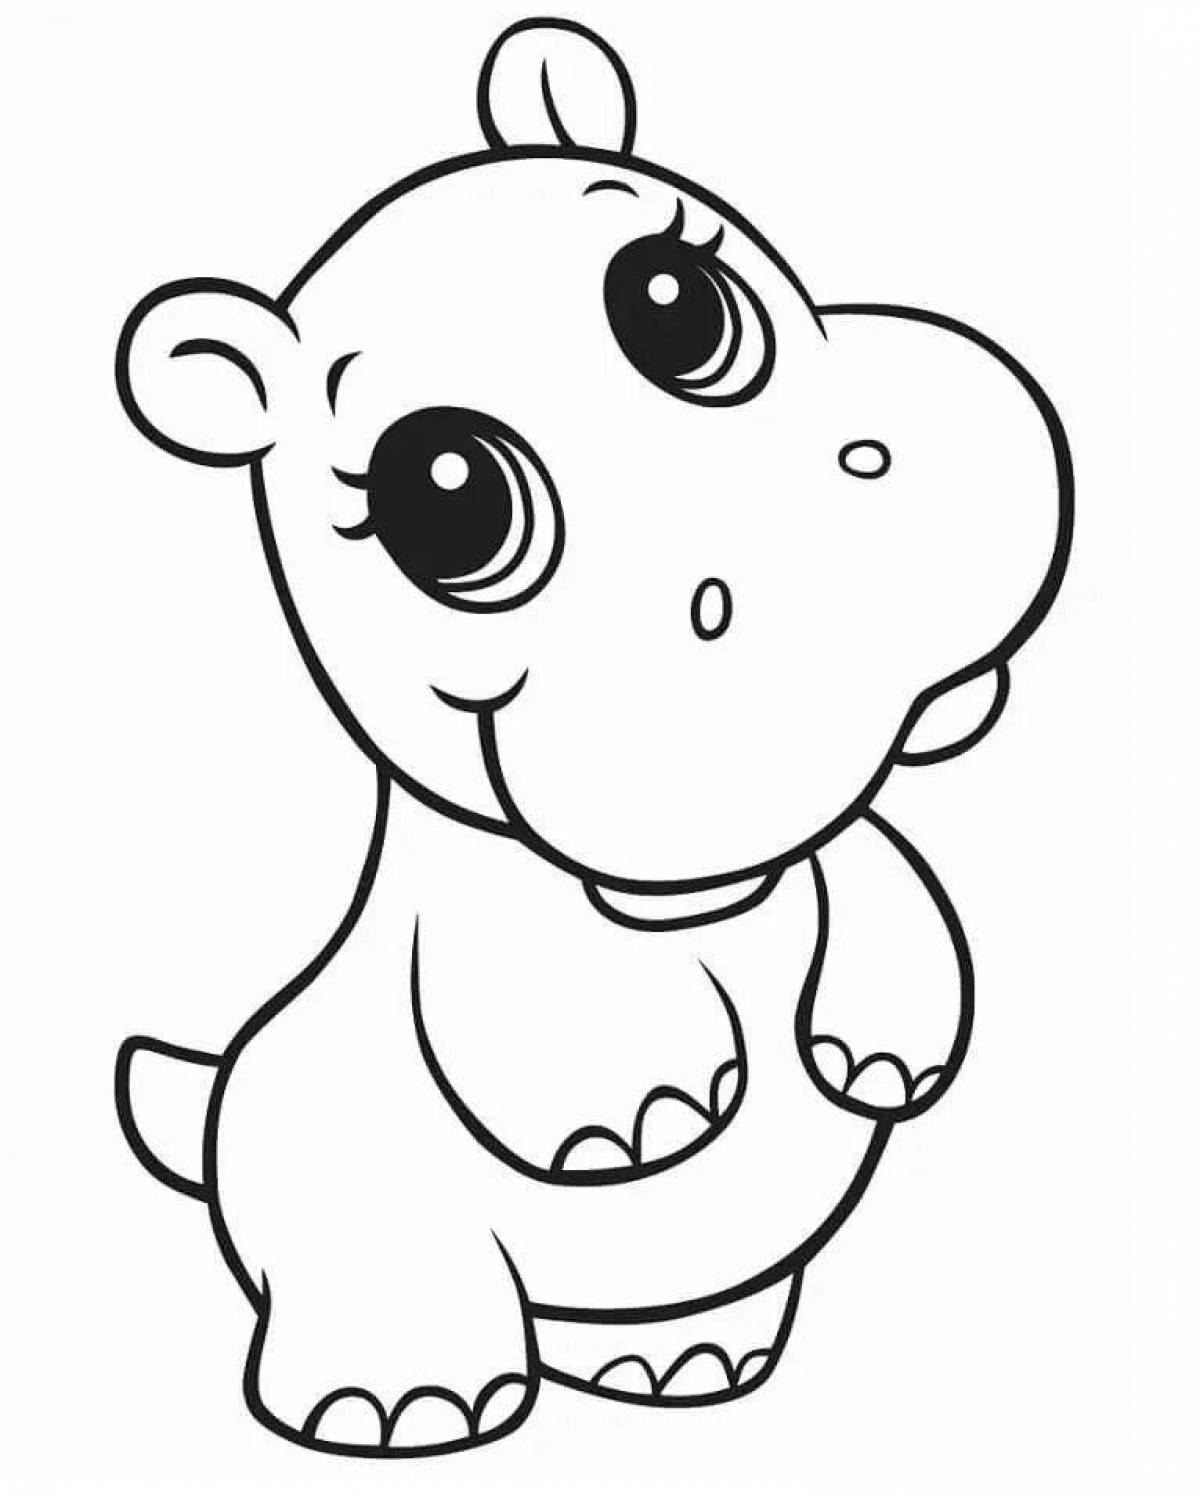 Amazing little animal coloring pages